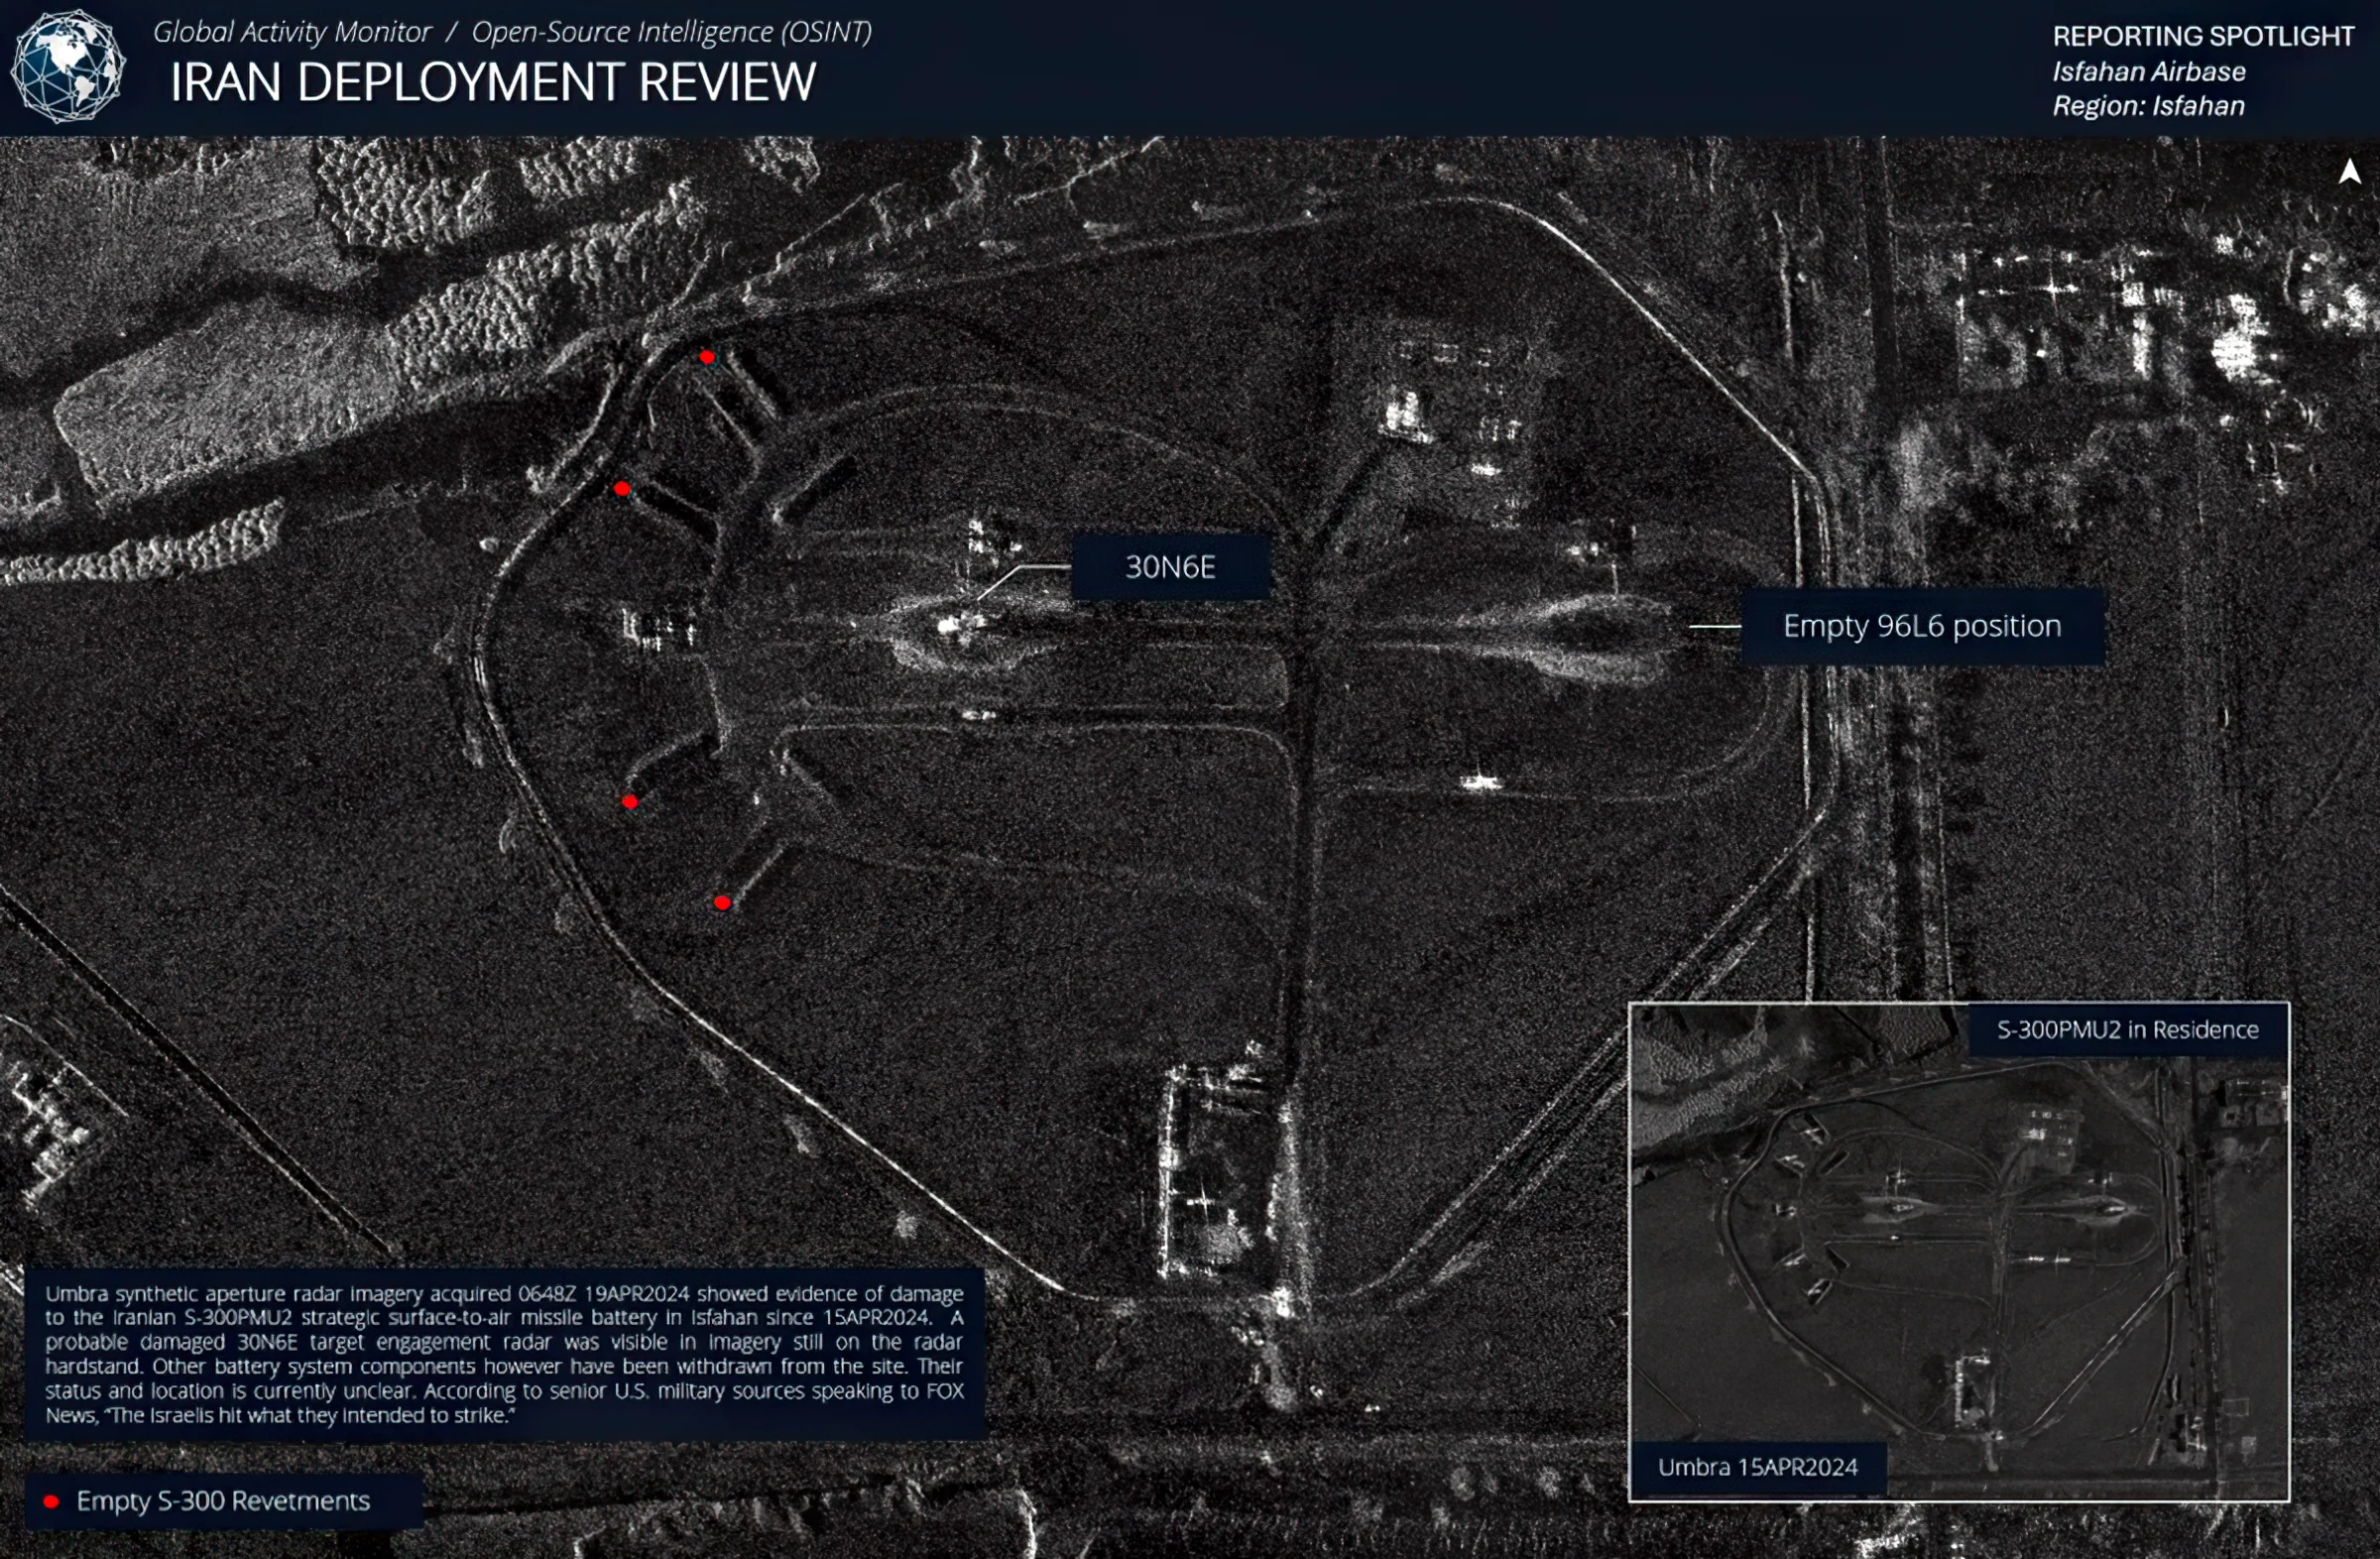 Umbra synthetic aperture radar imagery acquired 0648Z 19APR2024 showed evidence of damage to the Iranian S-300PMU2 strategic surface-to-air missile battery in Isfahan since 15APR2024. A probable damaged 30N6E target engagement radar was visible in imagery still on the radar hardstand. Other battery system components however have been withdrawn from the site. Their status and location is currently unclear. According to senior U.S. military sources speaking to FOX News, “The Israelis hit what they intended to strike.”
